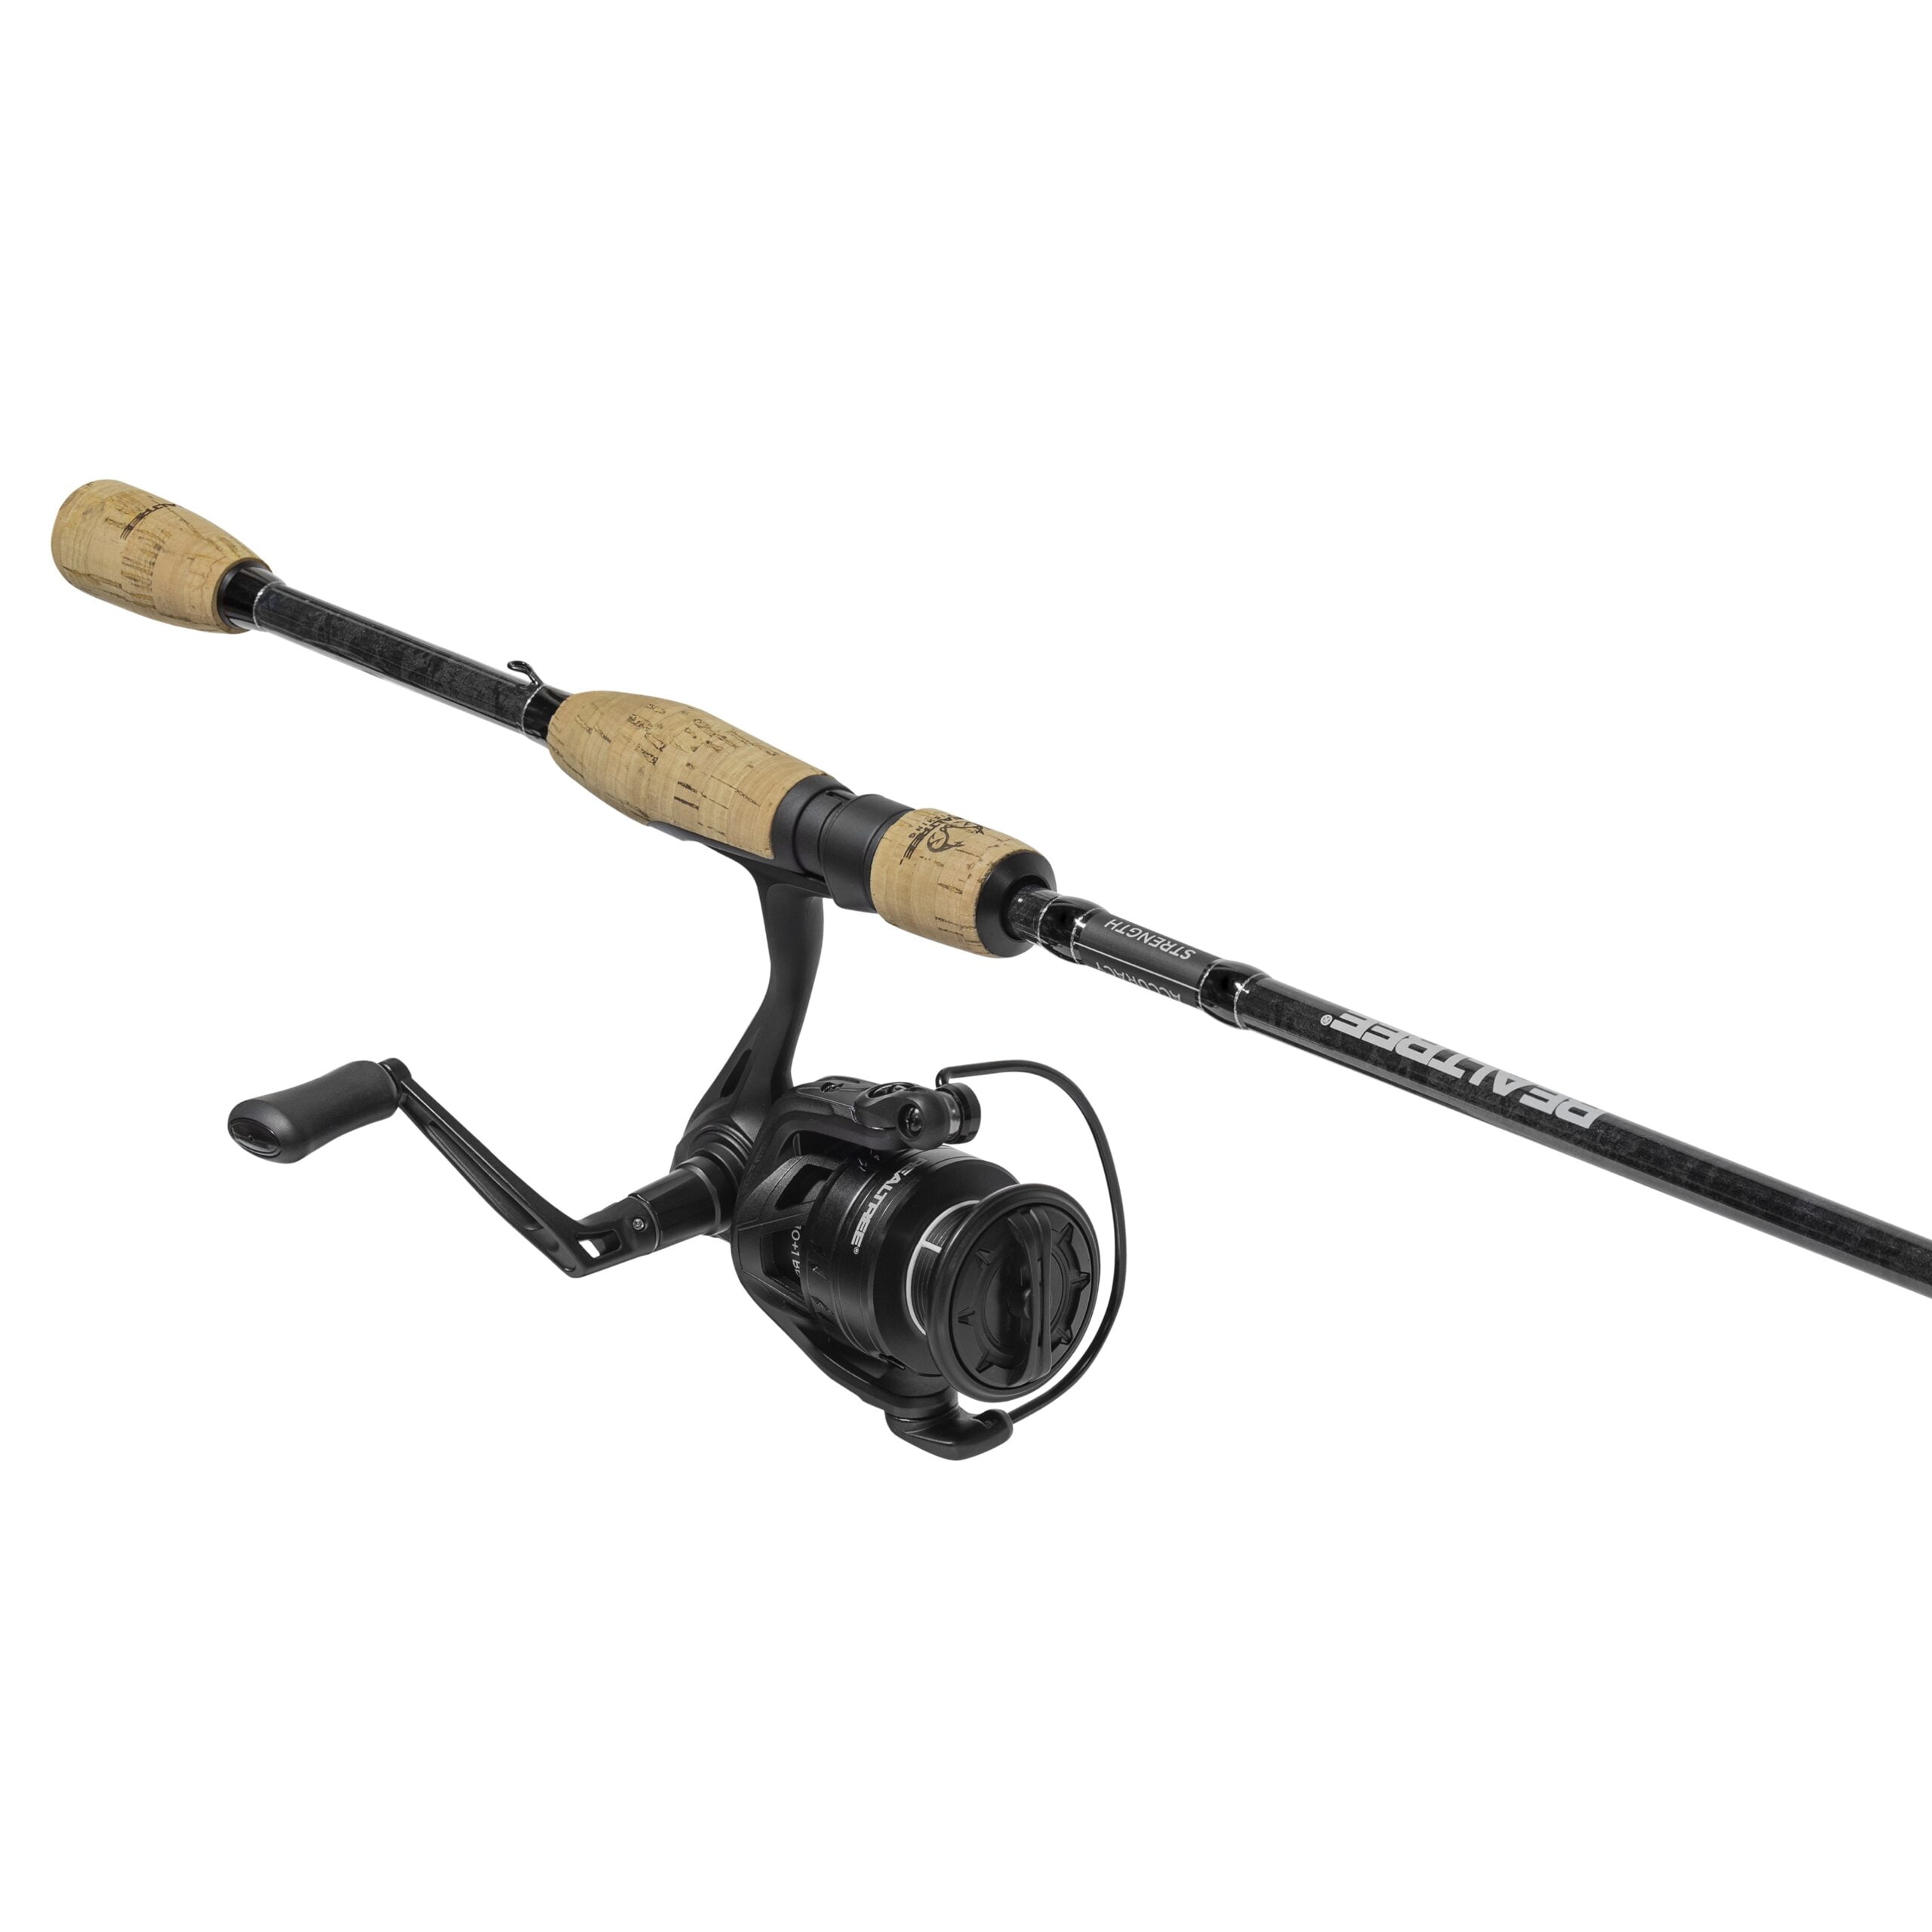 Length:6', 6 Section, Act: Medium 6' Telescope Spinning Fishing Rods 